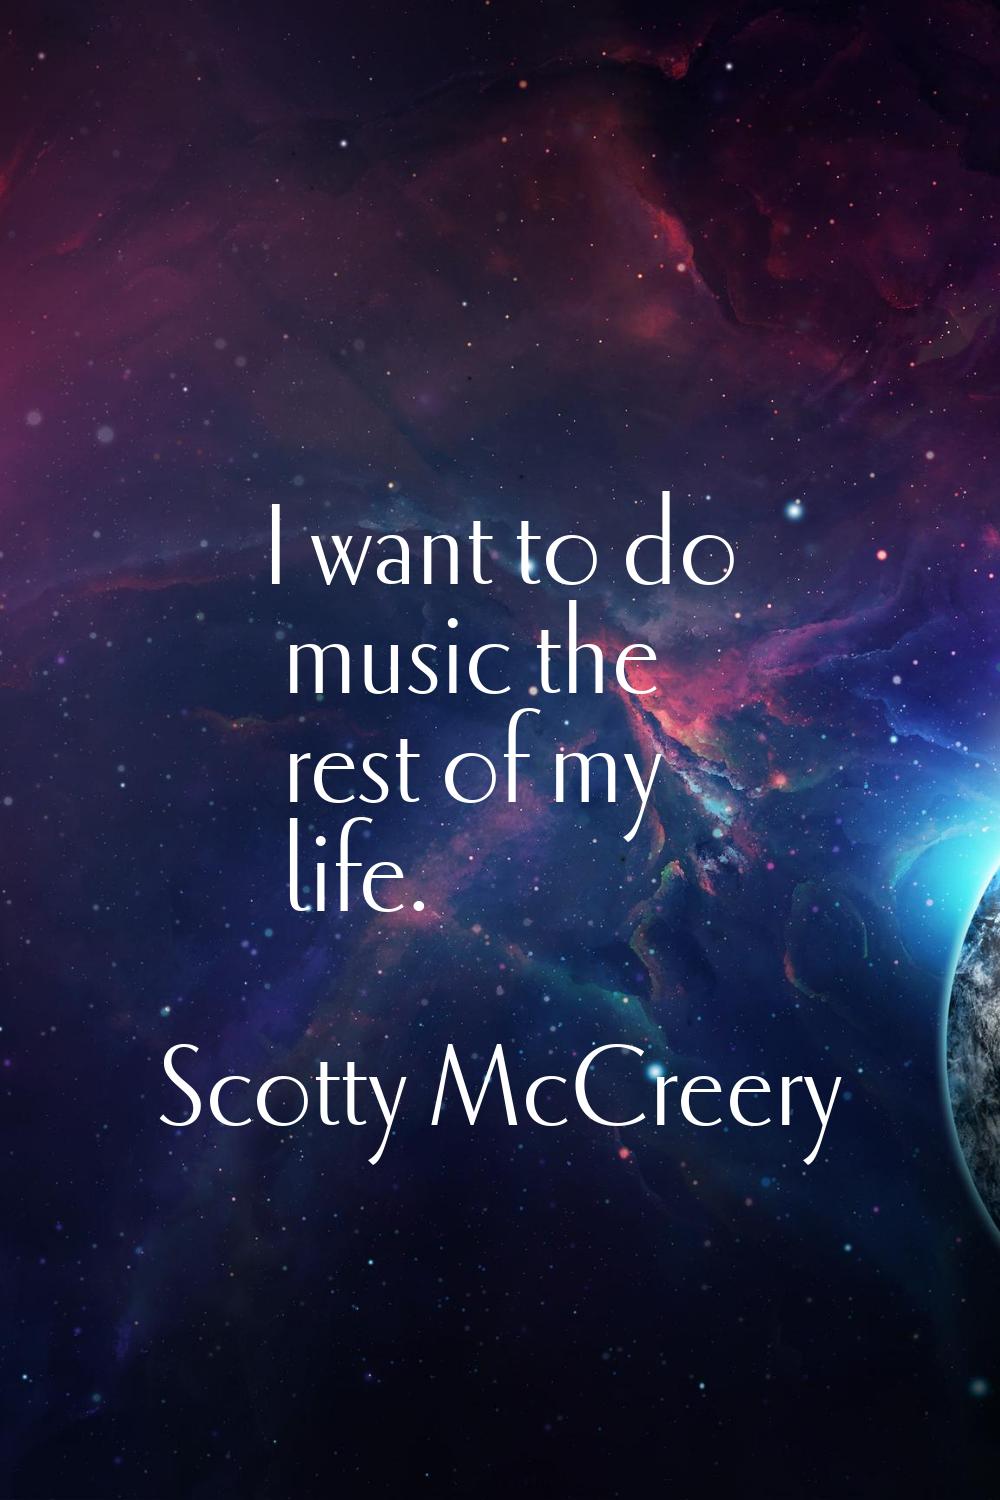 I want to do music the rest of my life.